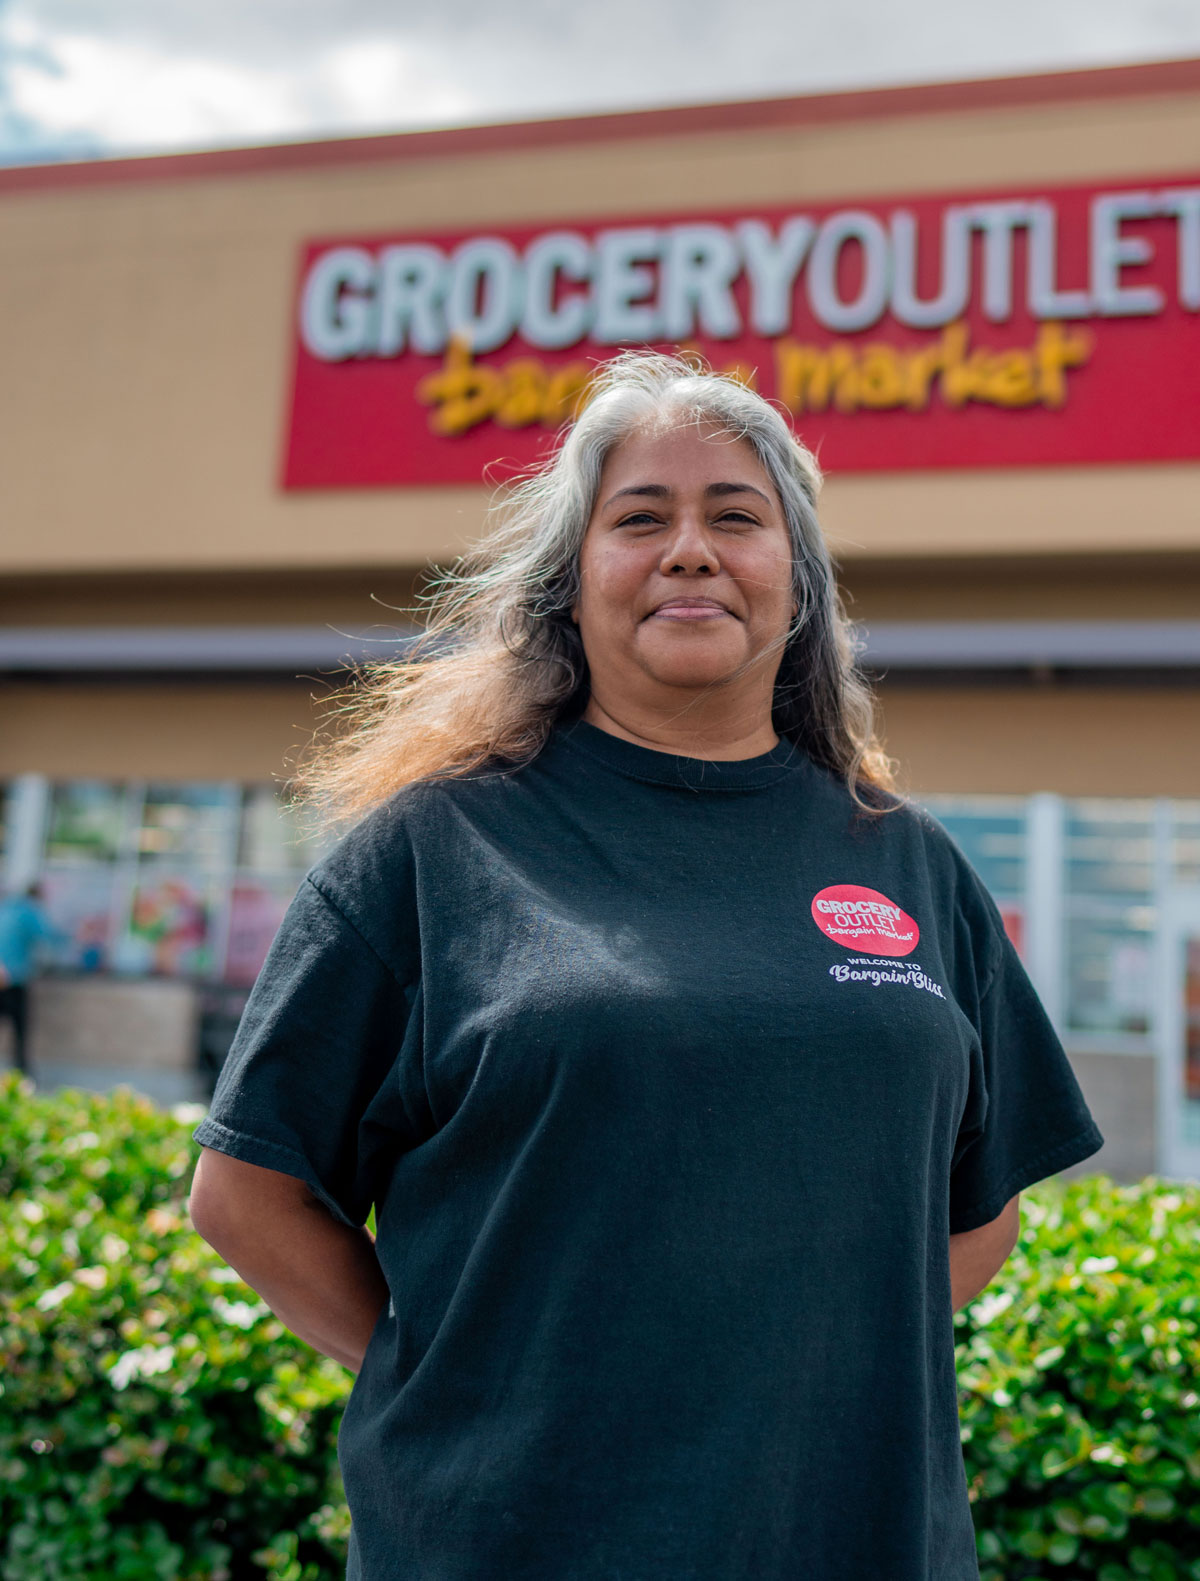 Inglewood Grocery Outlet small business owner, Patricia White